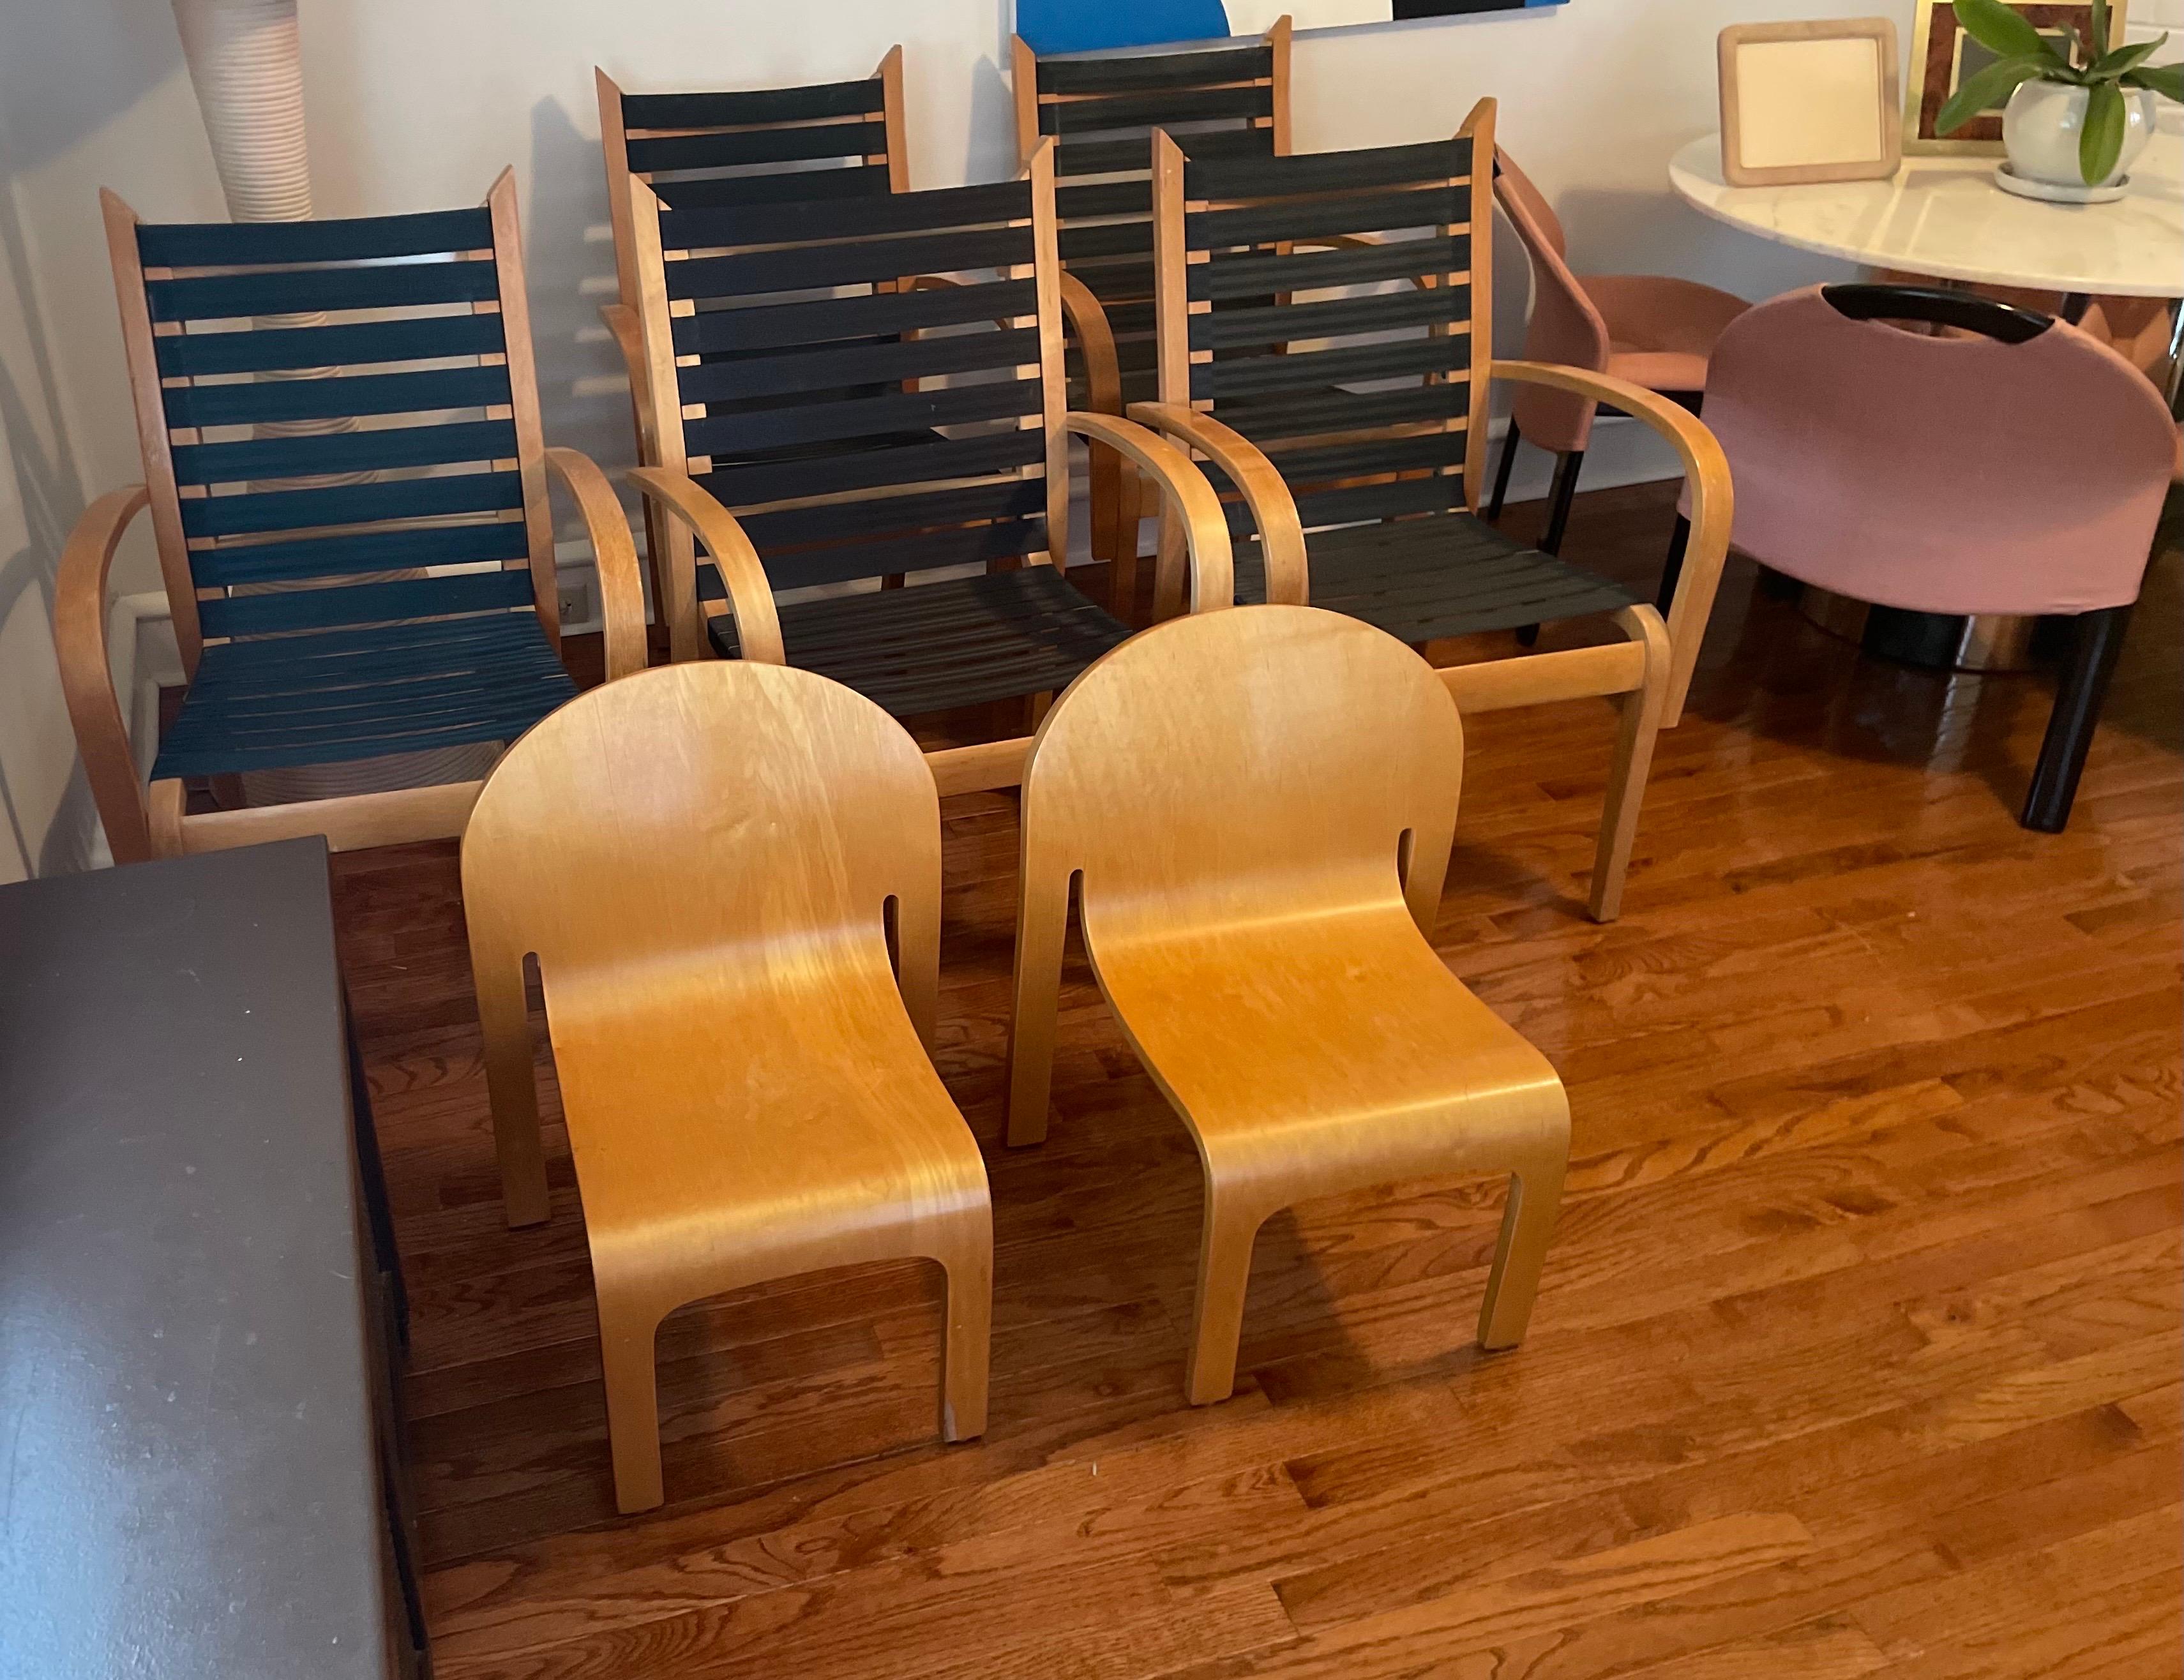 Children's Bodyform Chairs by Peter Danko, 1980s, American For Sale 4